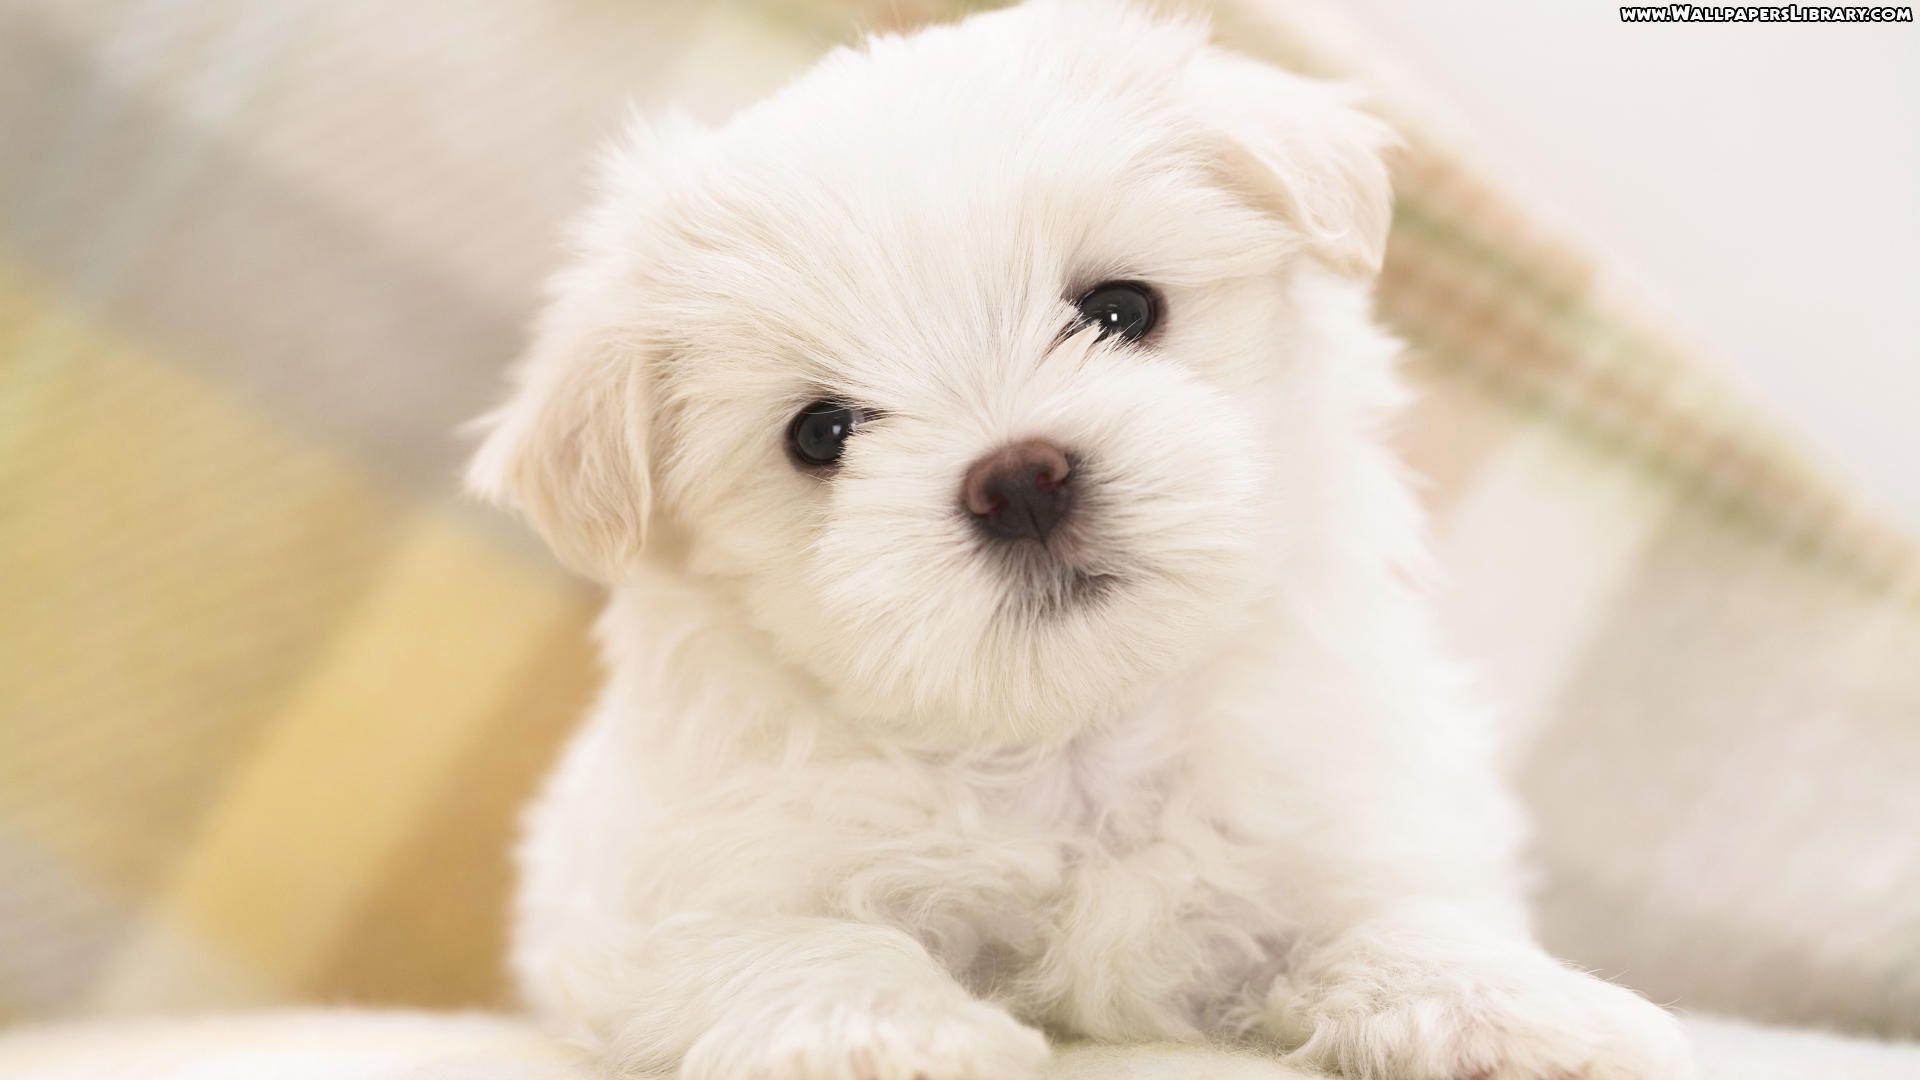 Wallpaper For > Cute Puppies Wallpaper Background